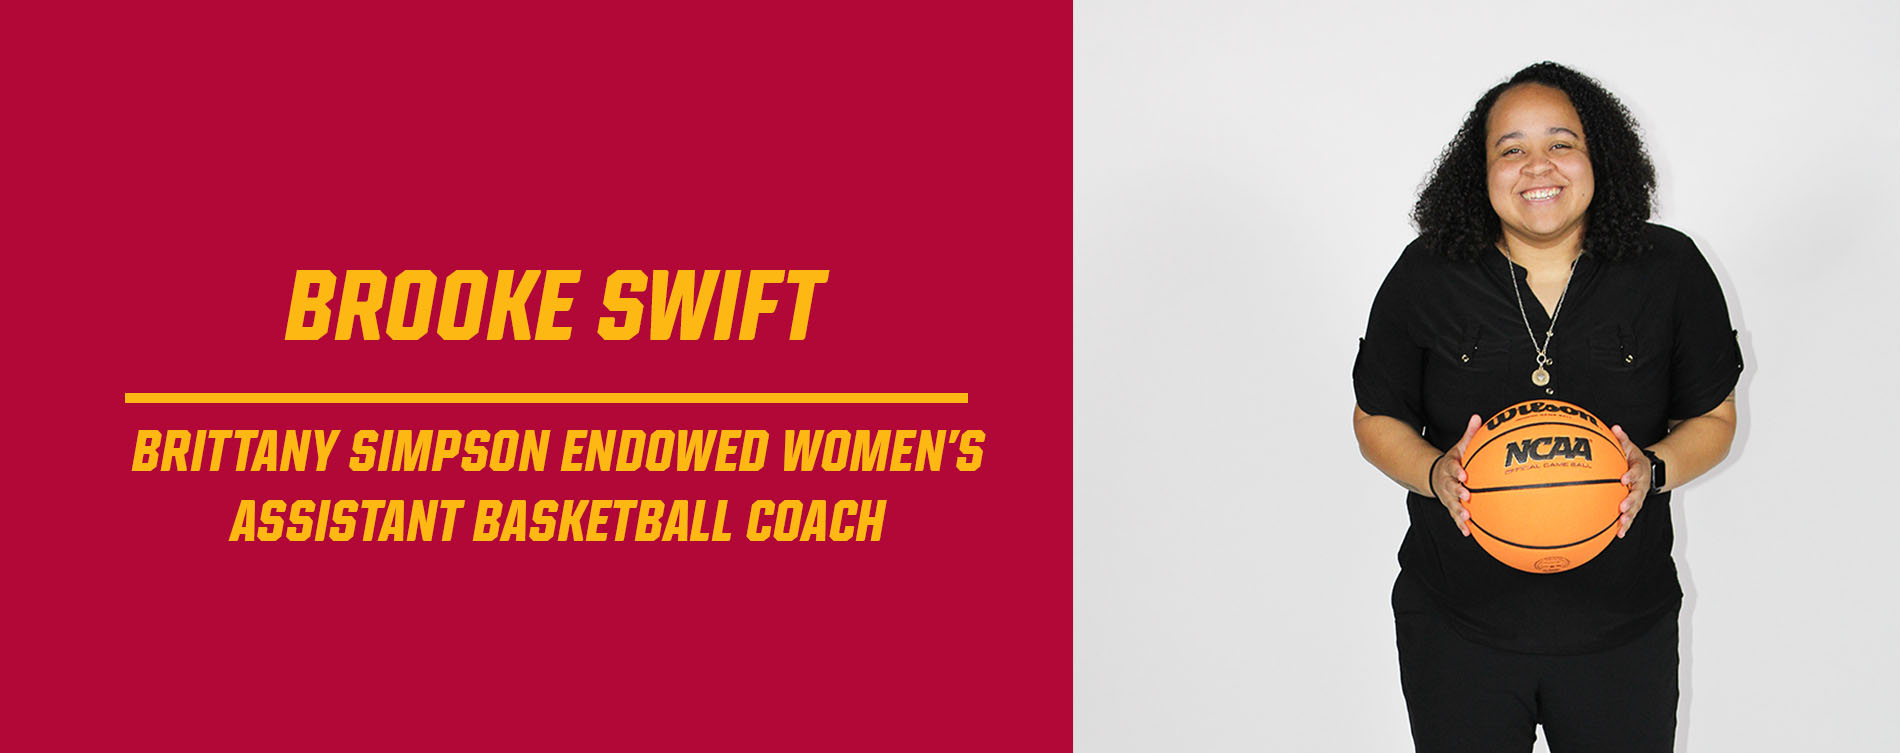 Swift Named Endowed Brittany Simpson Women's Assistant Basketball Coach